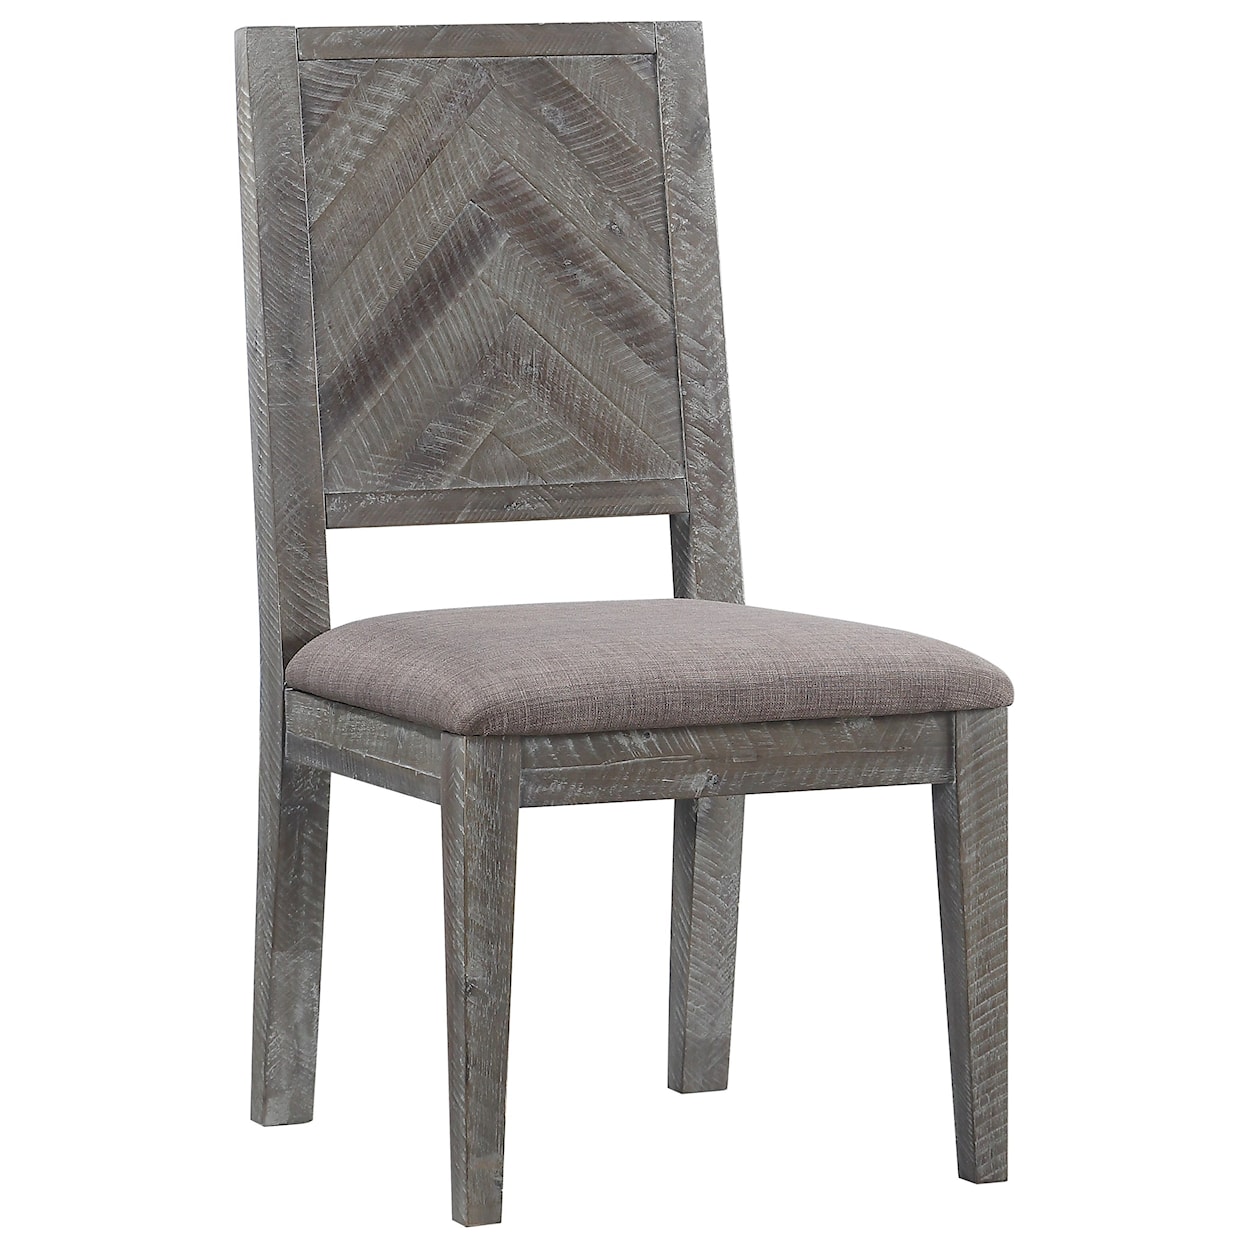 Modus International Herringbone Table and Chair Set with Bench